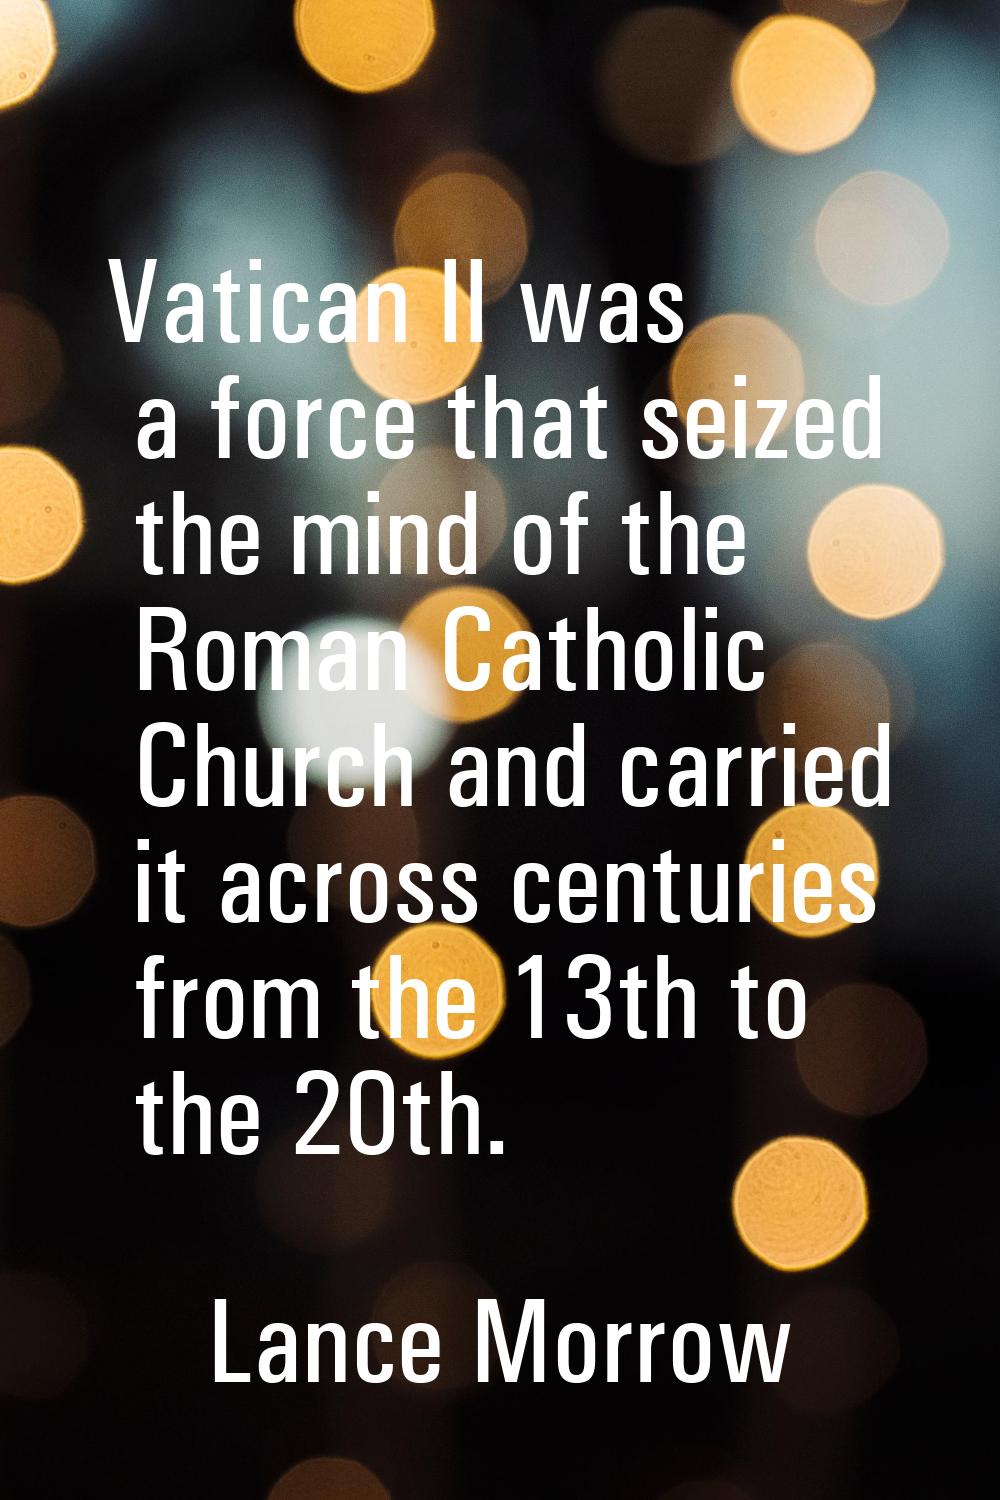 Vatican II was a force that seized the mind of the Roman Catholic Church and carried it across cent